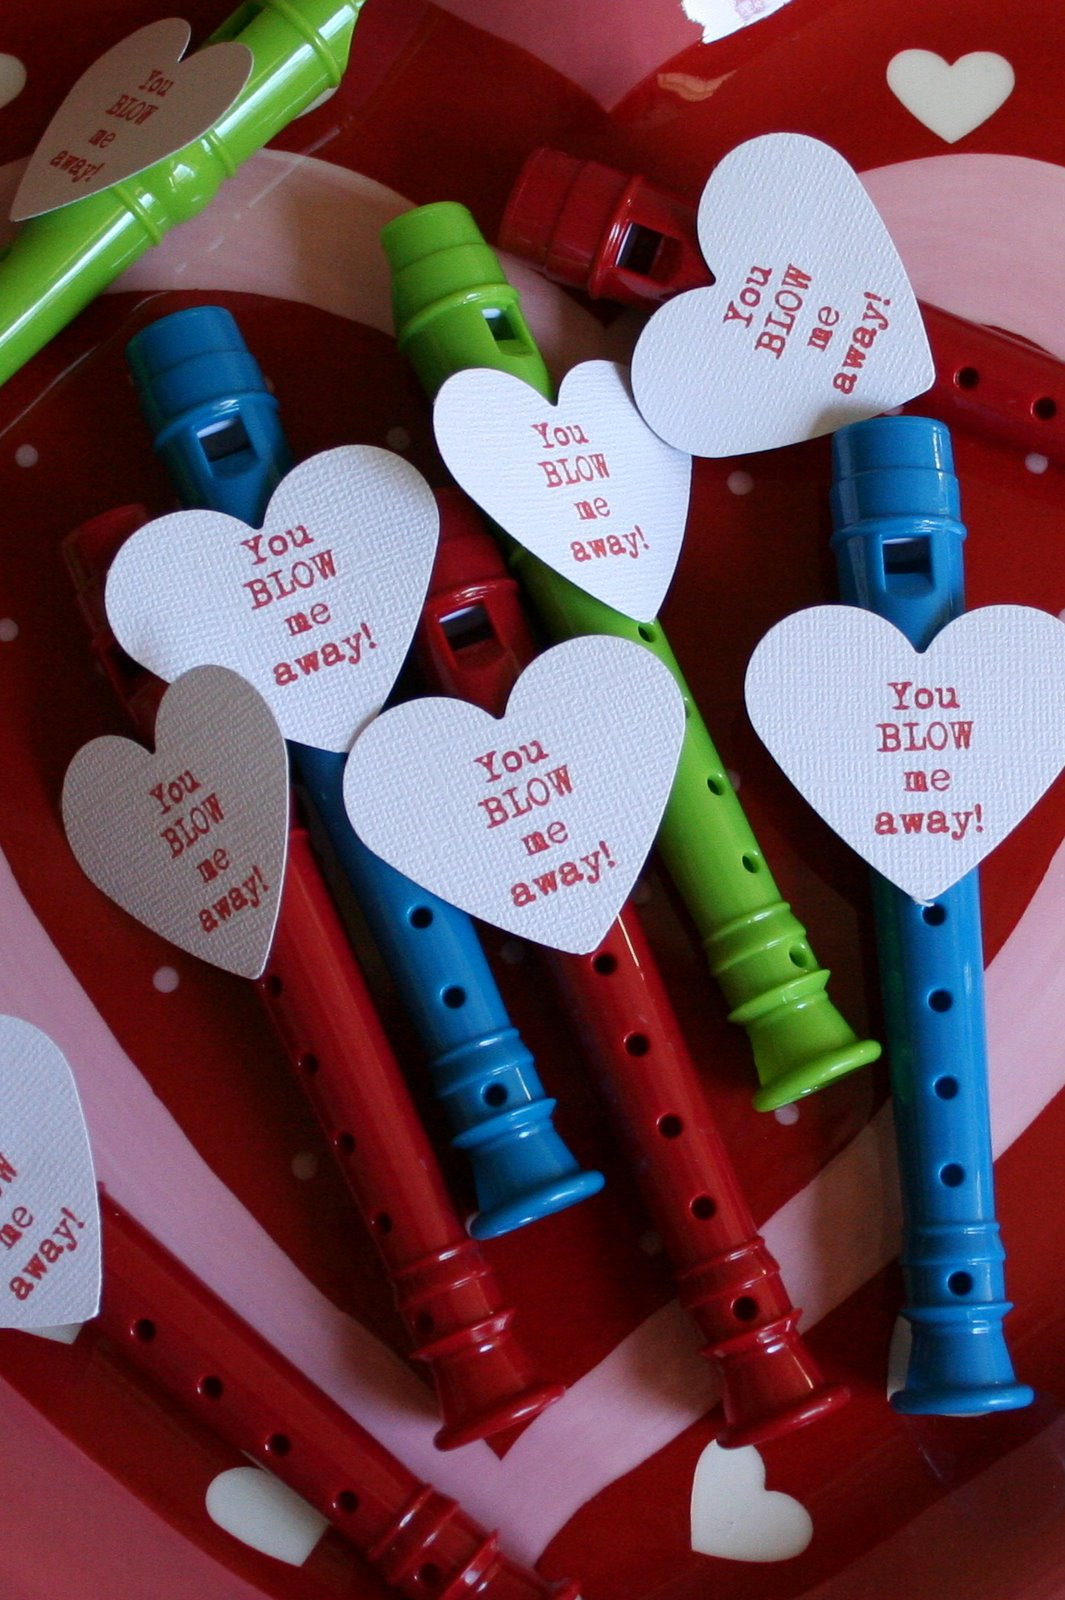 School Valentine Gift Ideas
 Blow Me Away Whistle Valentine Dukes and Duchesses